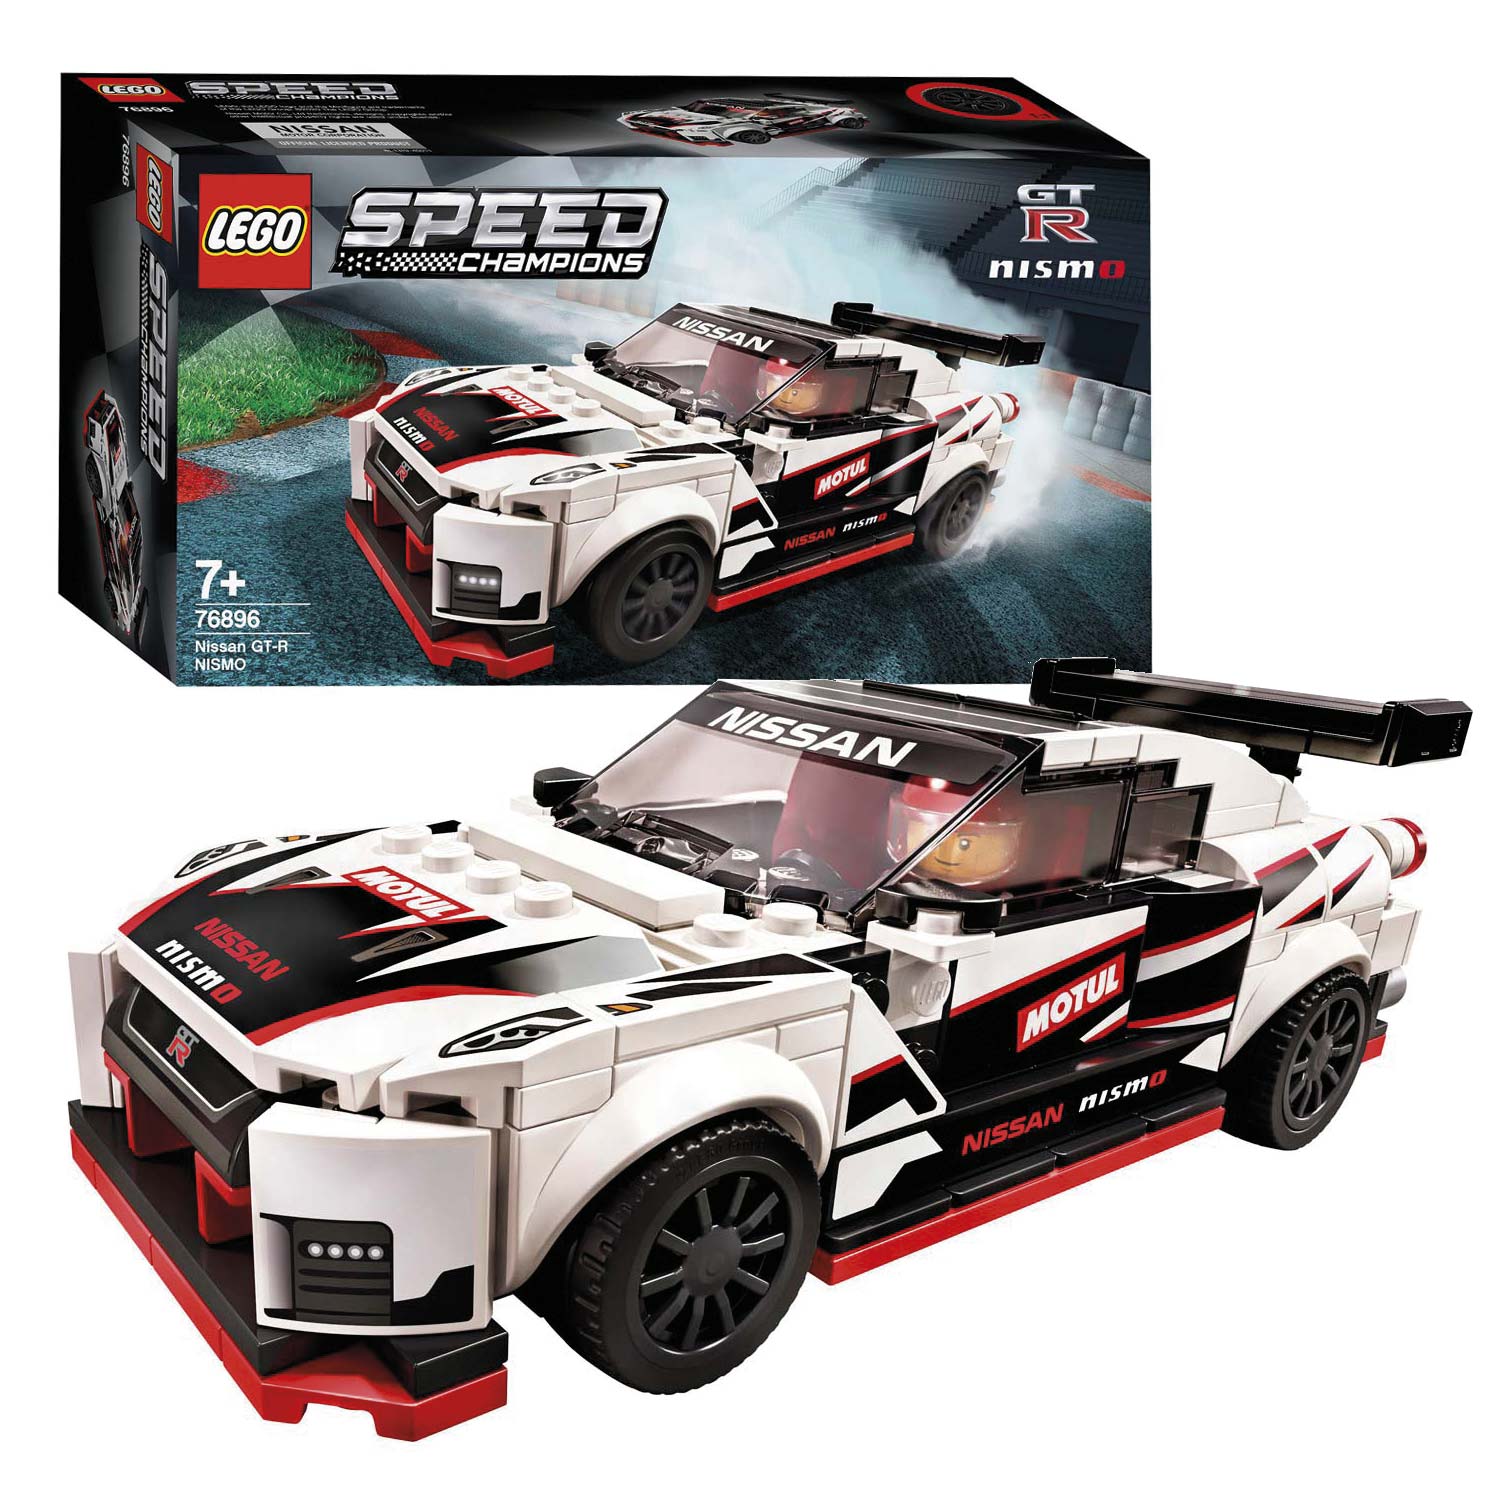 LEGO Speed Champions 76896 Speed Champions Nissan GT-R Nismo